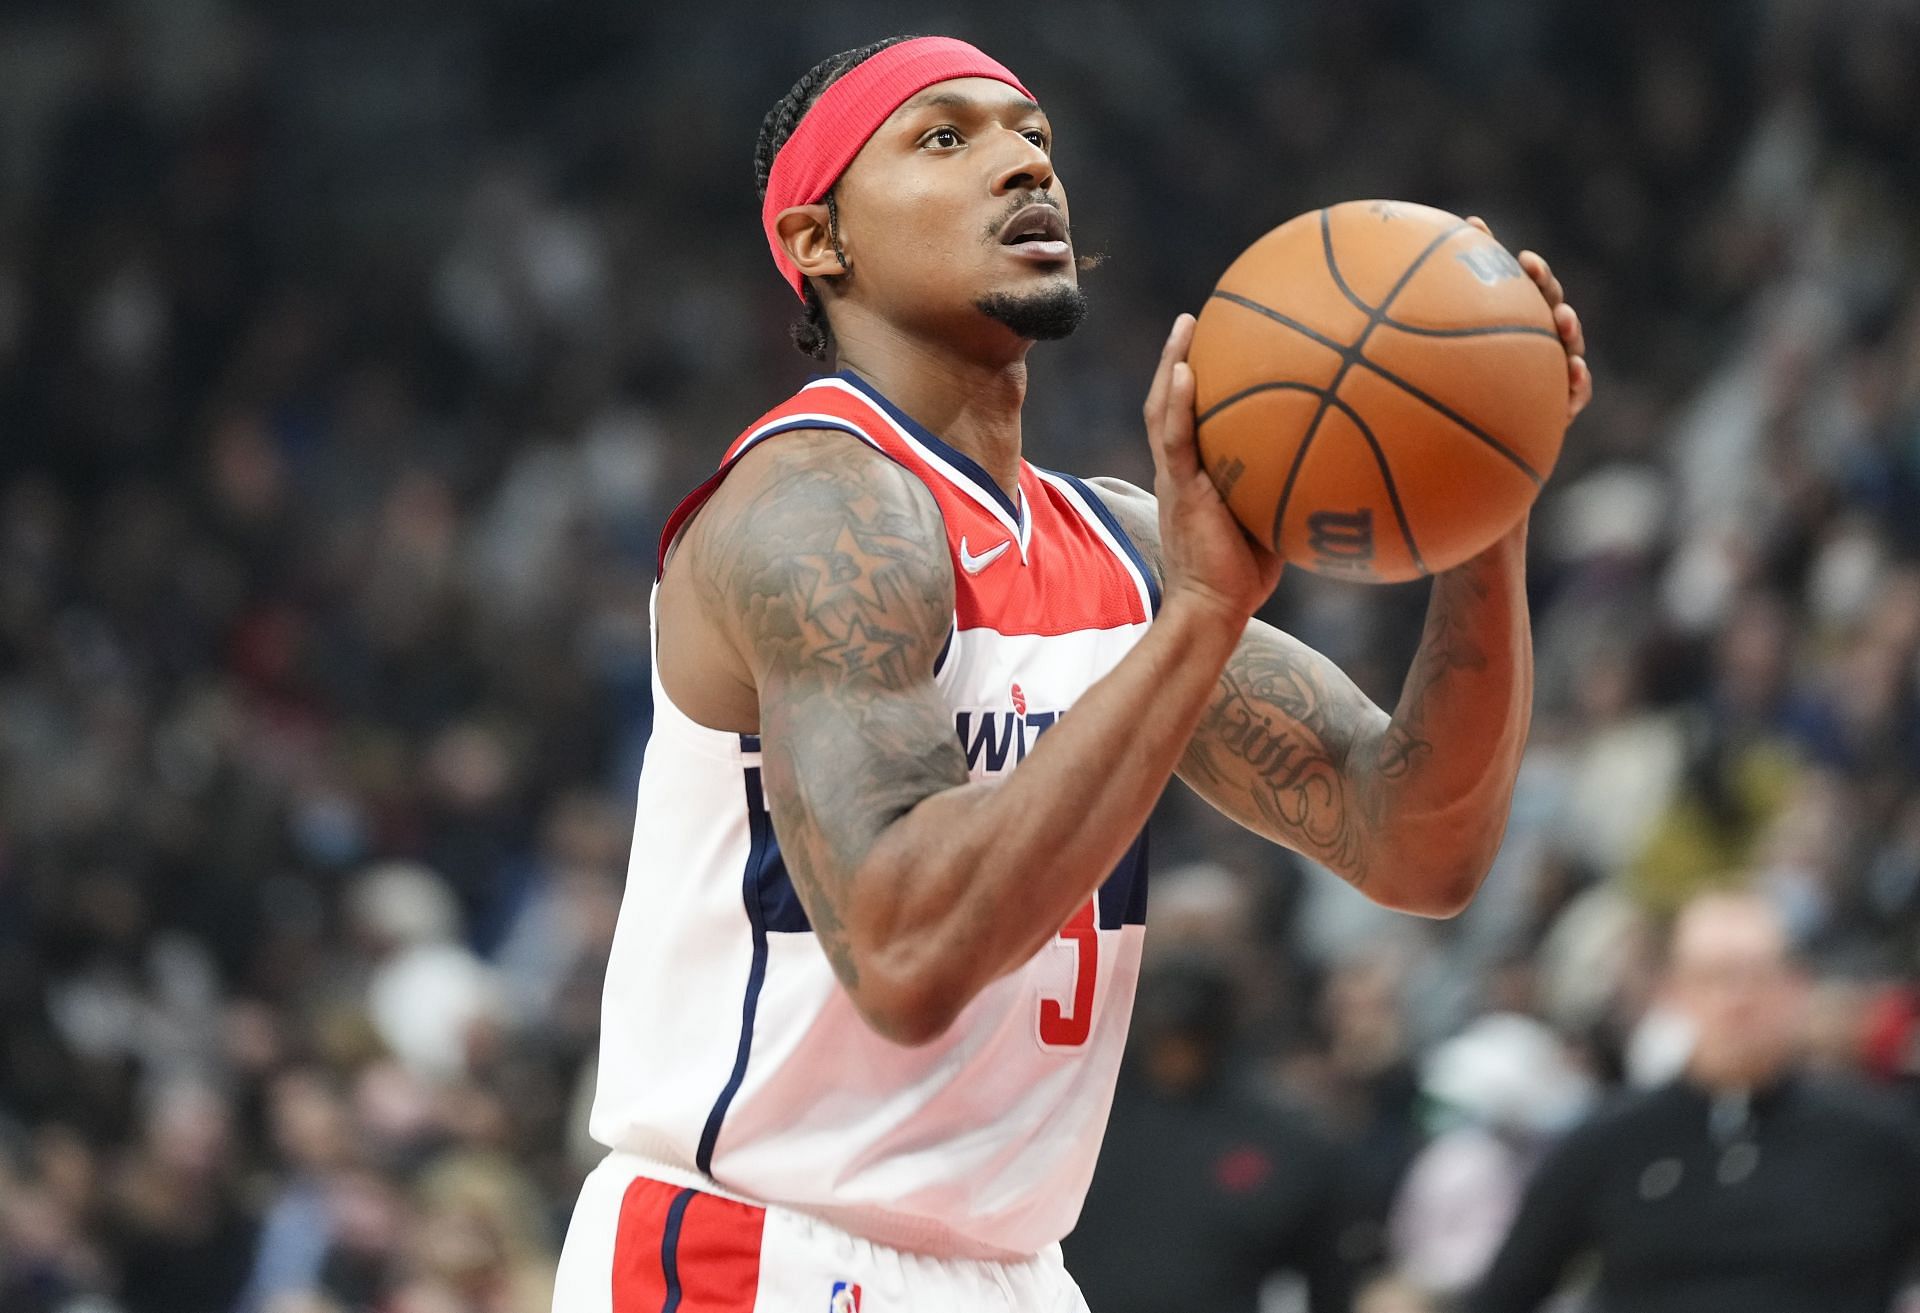 Bradley Beal is arguably the best shooting guard in the NBA.